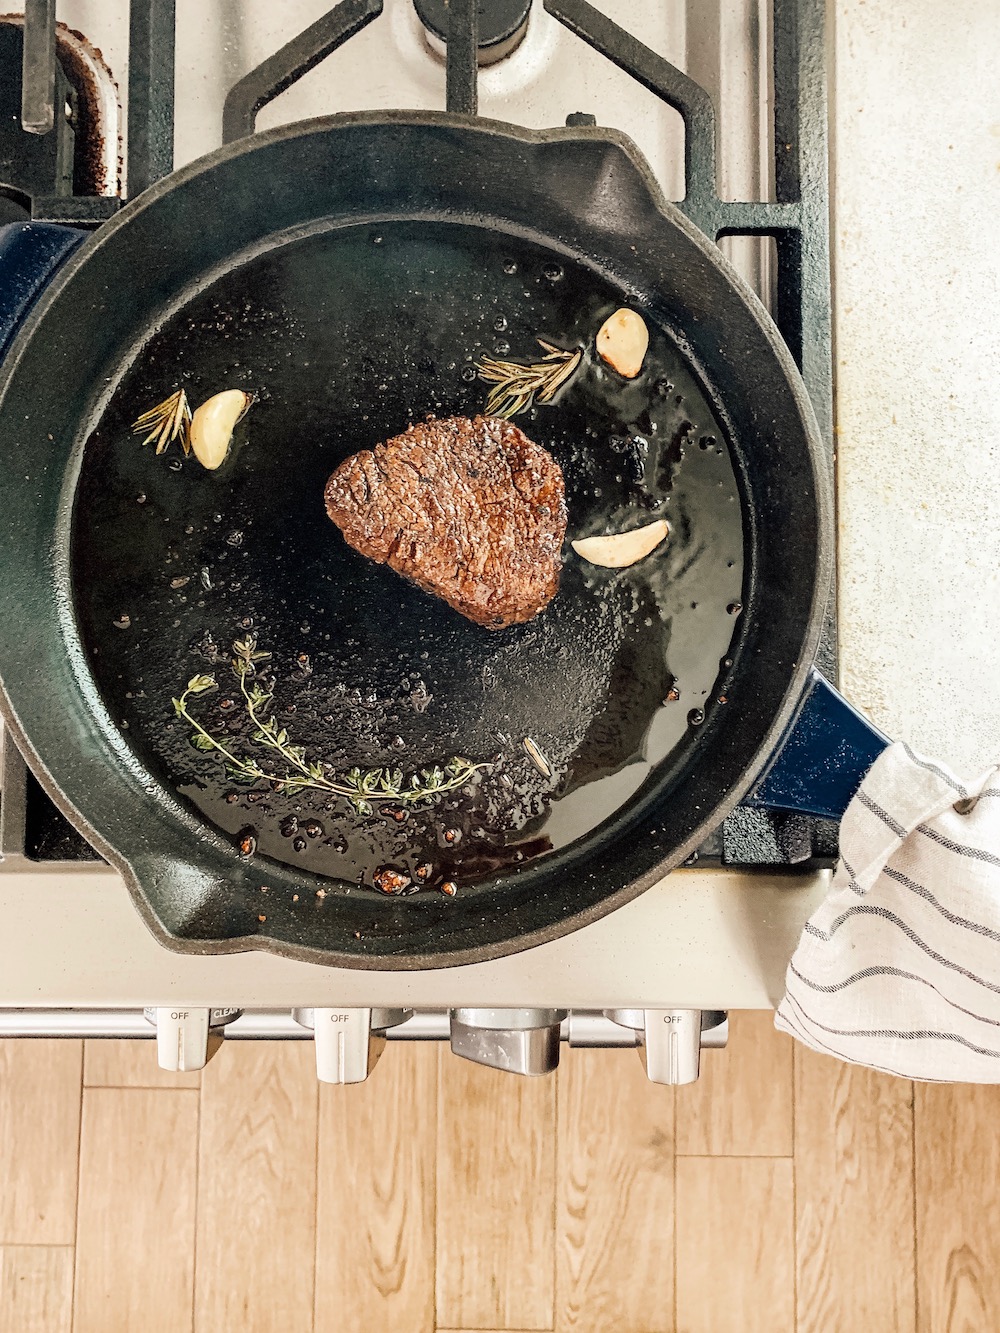 How to Perfectly Cook a Steak